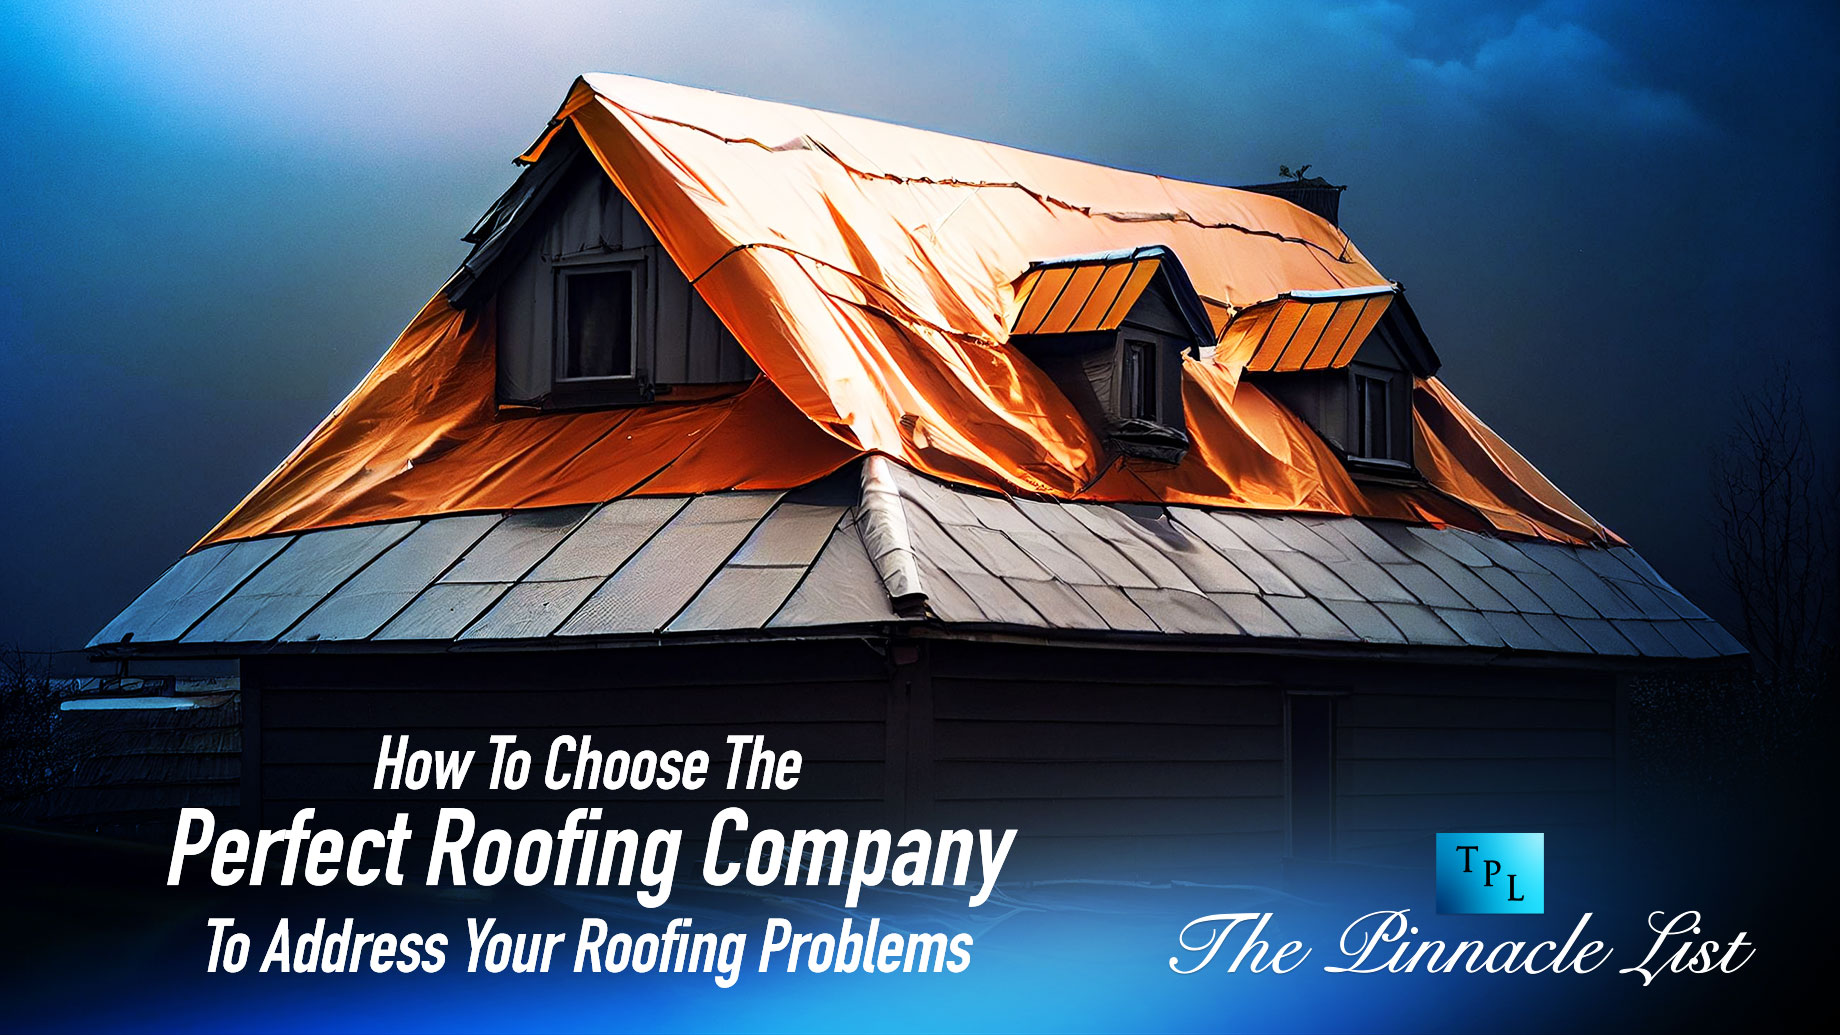 How To Choose The Perfect Roofing Company To Address Your Roofing Problems